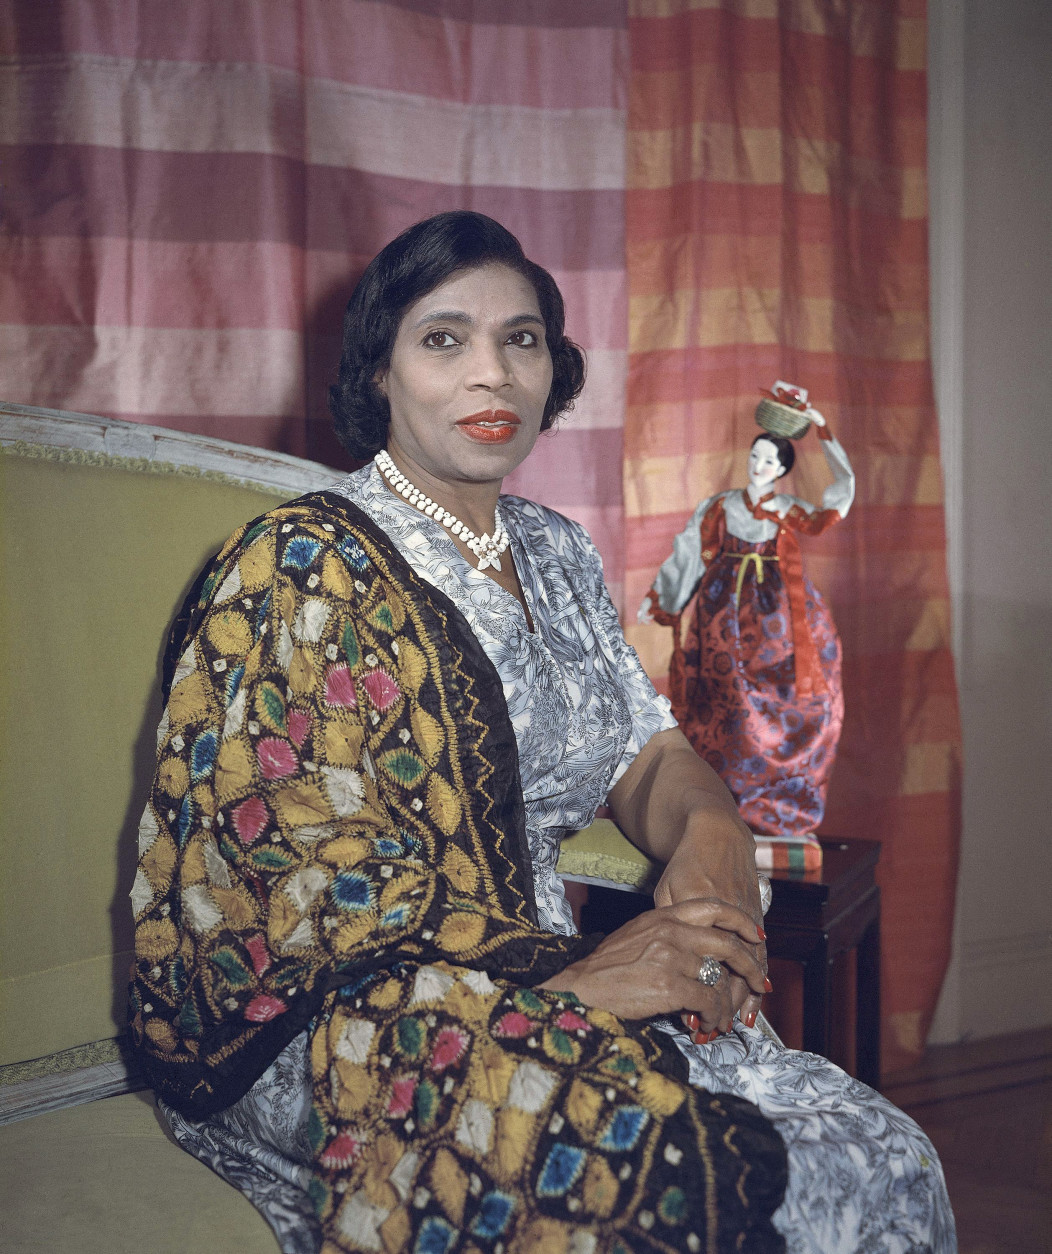 Singer Marian Anderson holds a Korean doll in her New York apartment, Aug. 5, 1958. The doll and the shawl she is wearing are gifts received on a trip to the Far East. Miss Anderson became a member of the United States delegation to the United Nations, which she sees as an opportunity to contribute to the mutual understandings of people. (AP Photo)